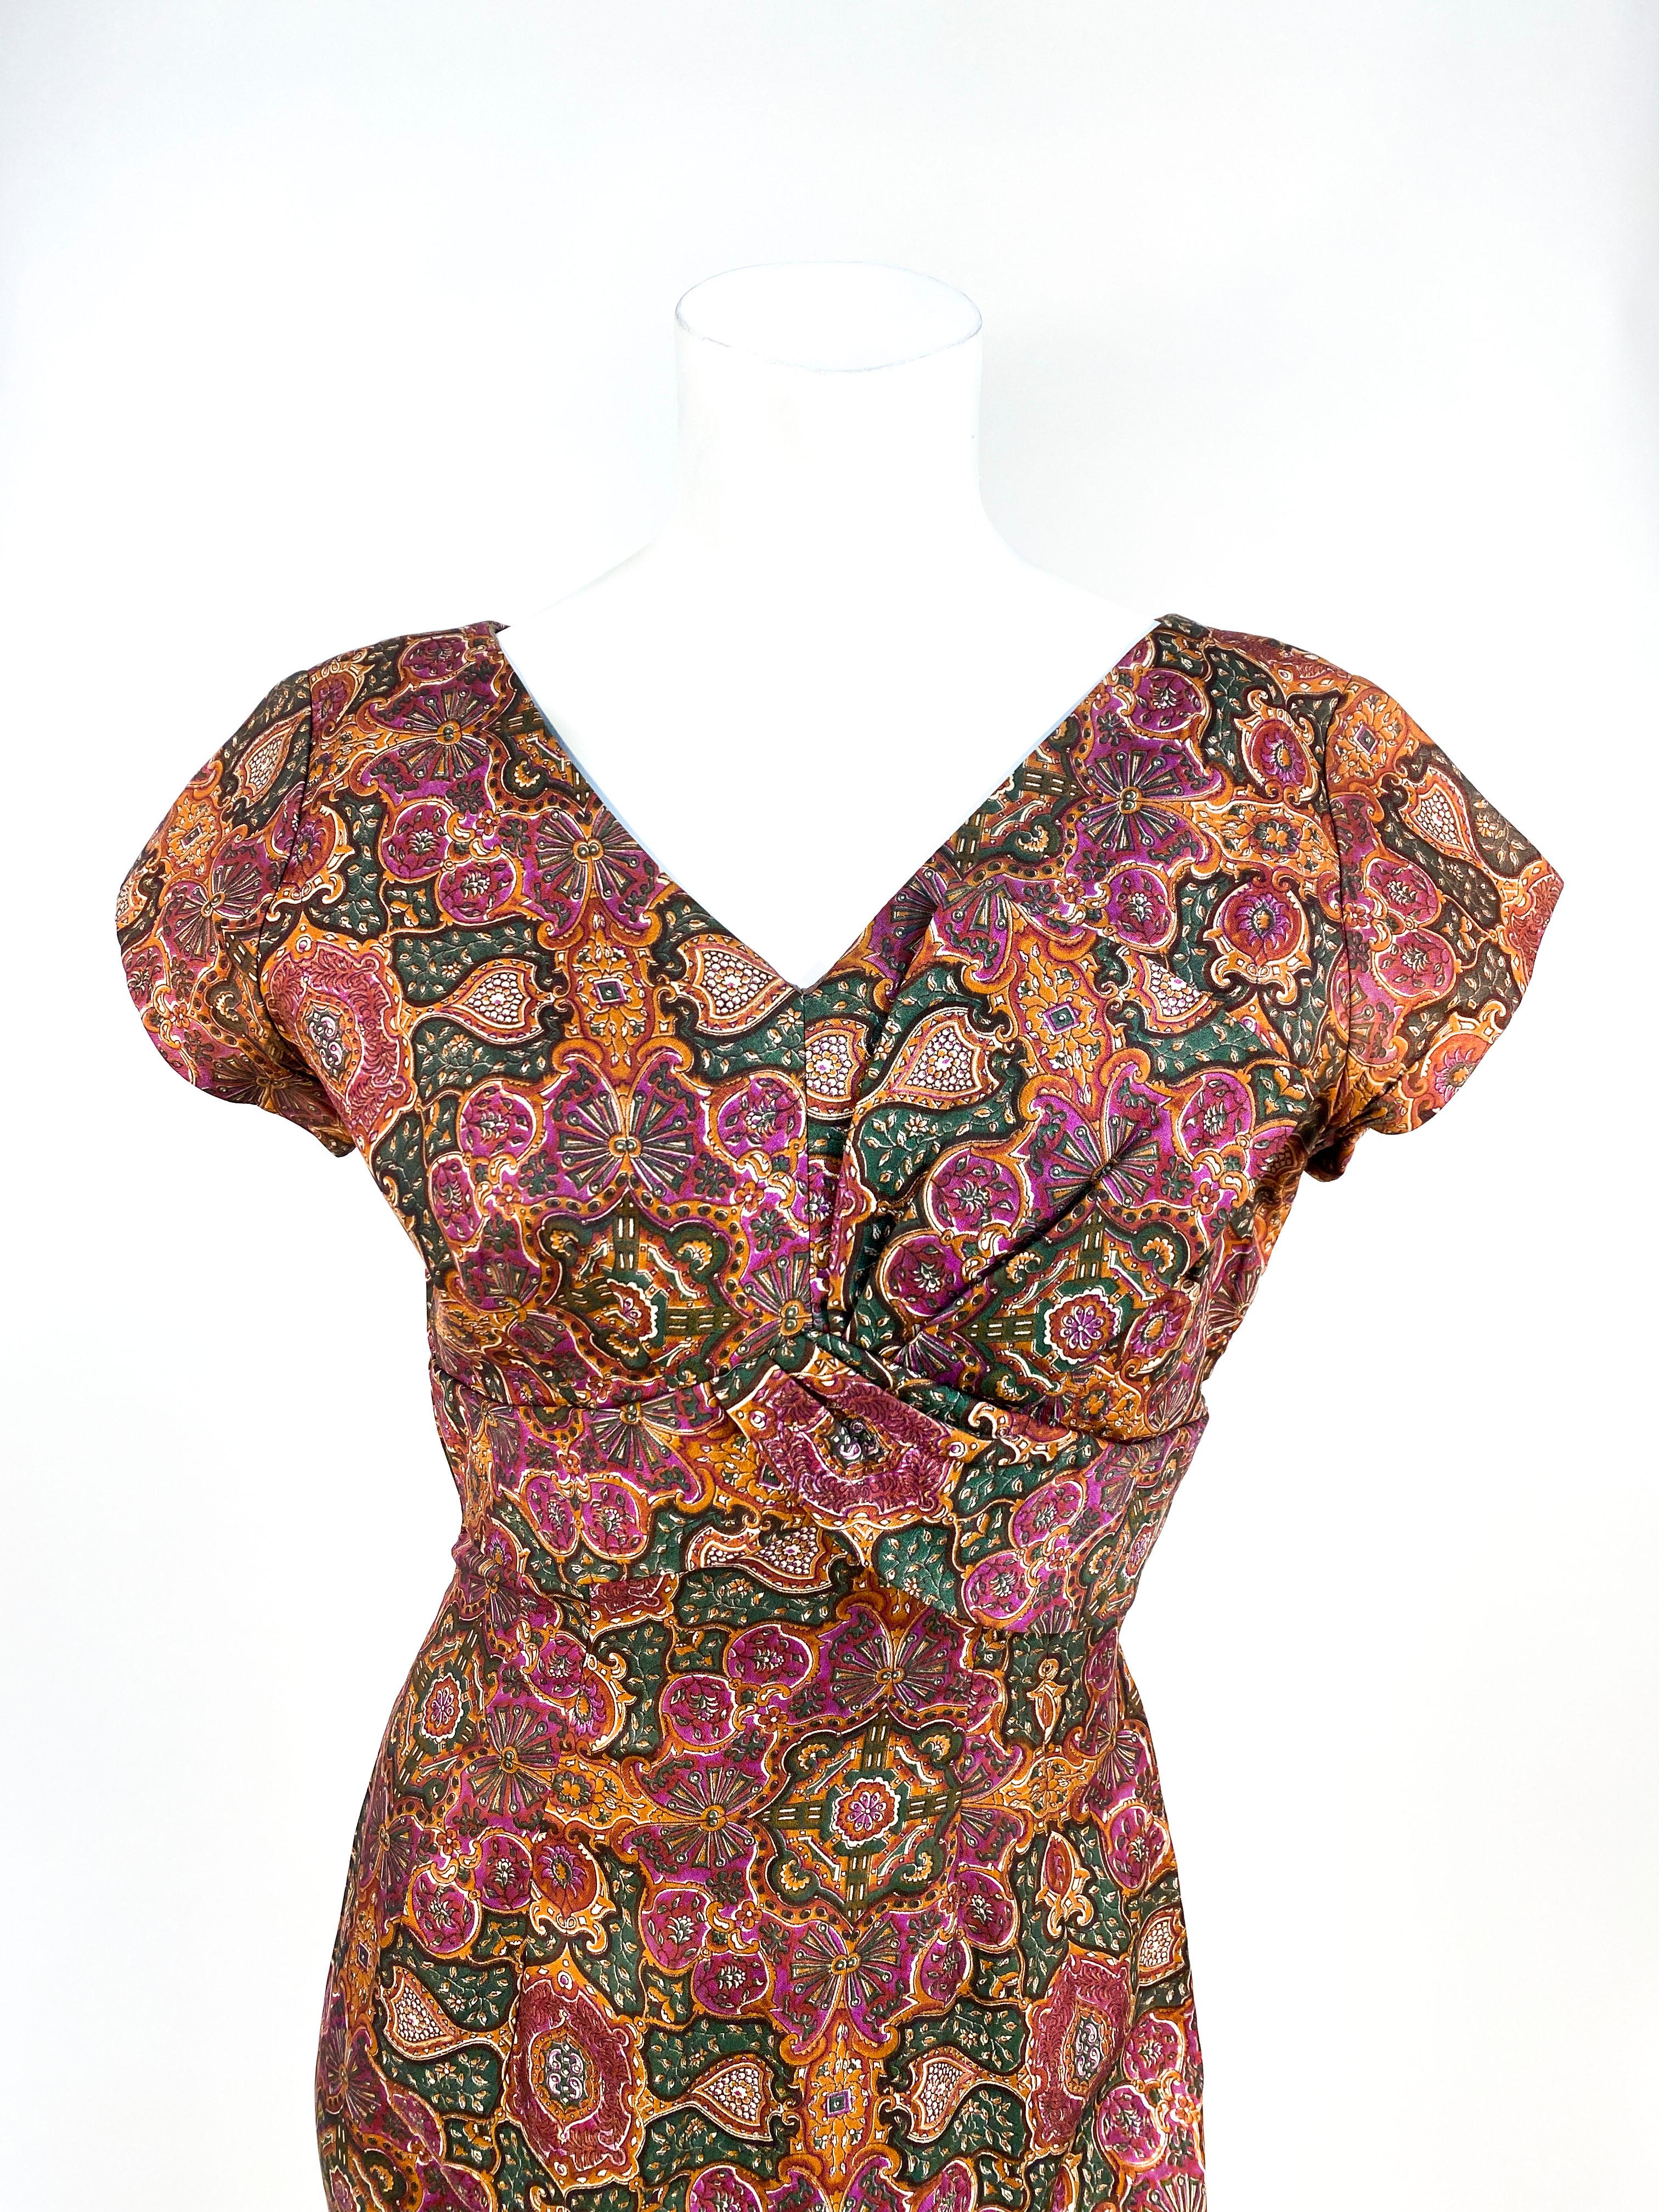 1950s Mosaic Printed Cocktail Dress with empire bust line, sash decoration on one side, cap sleeves, and darting. The back has a metal zip closure.